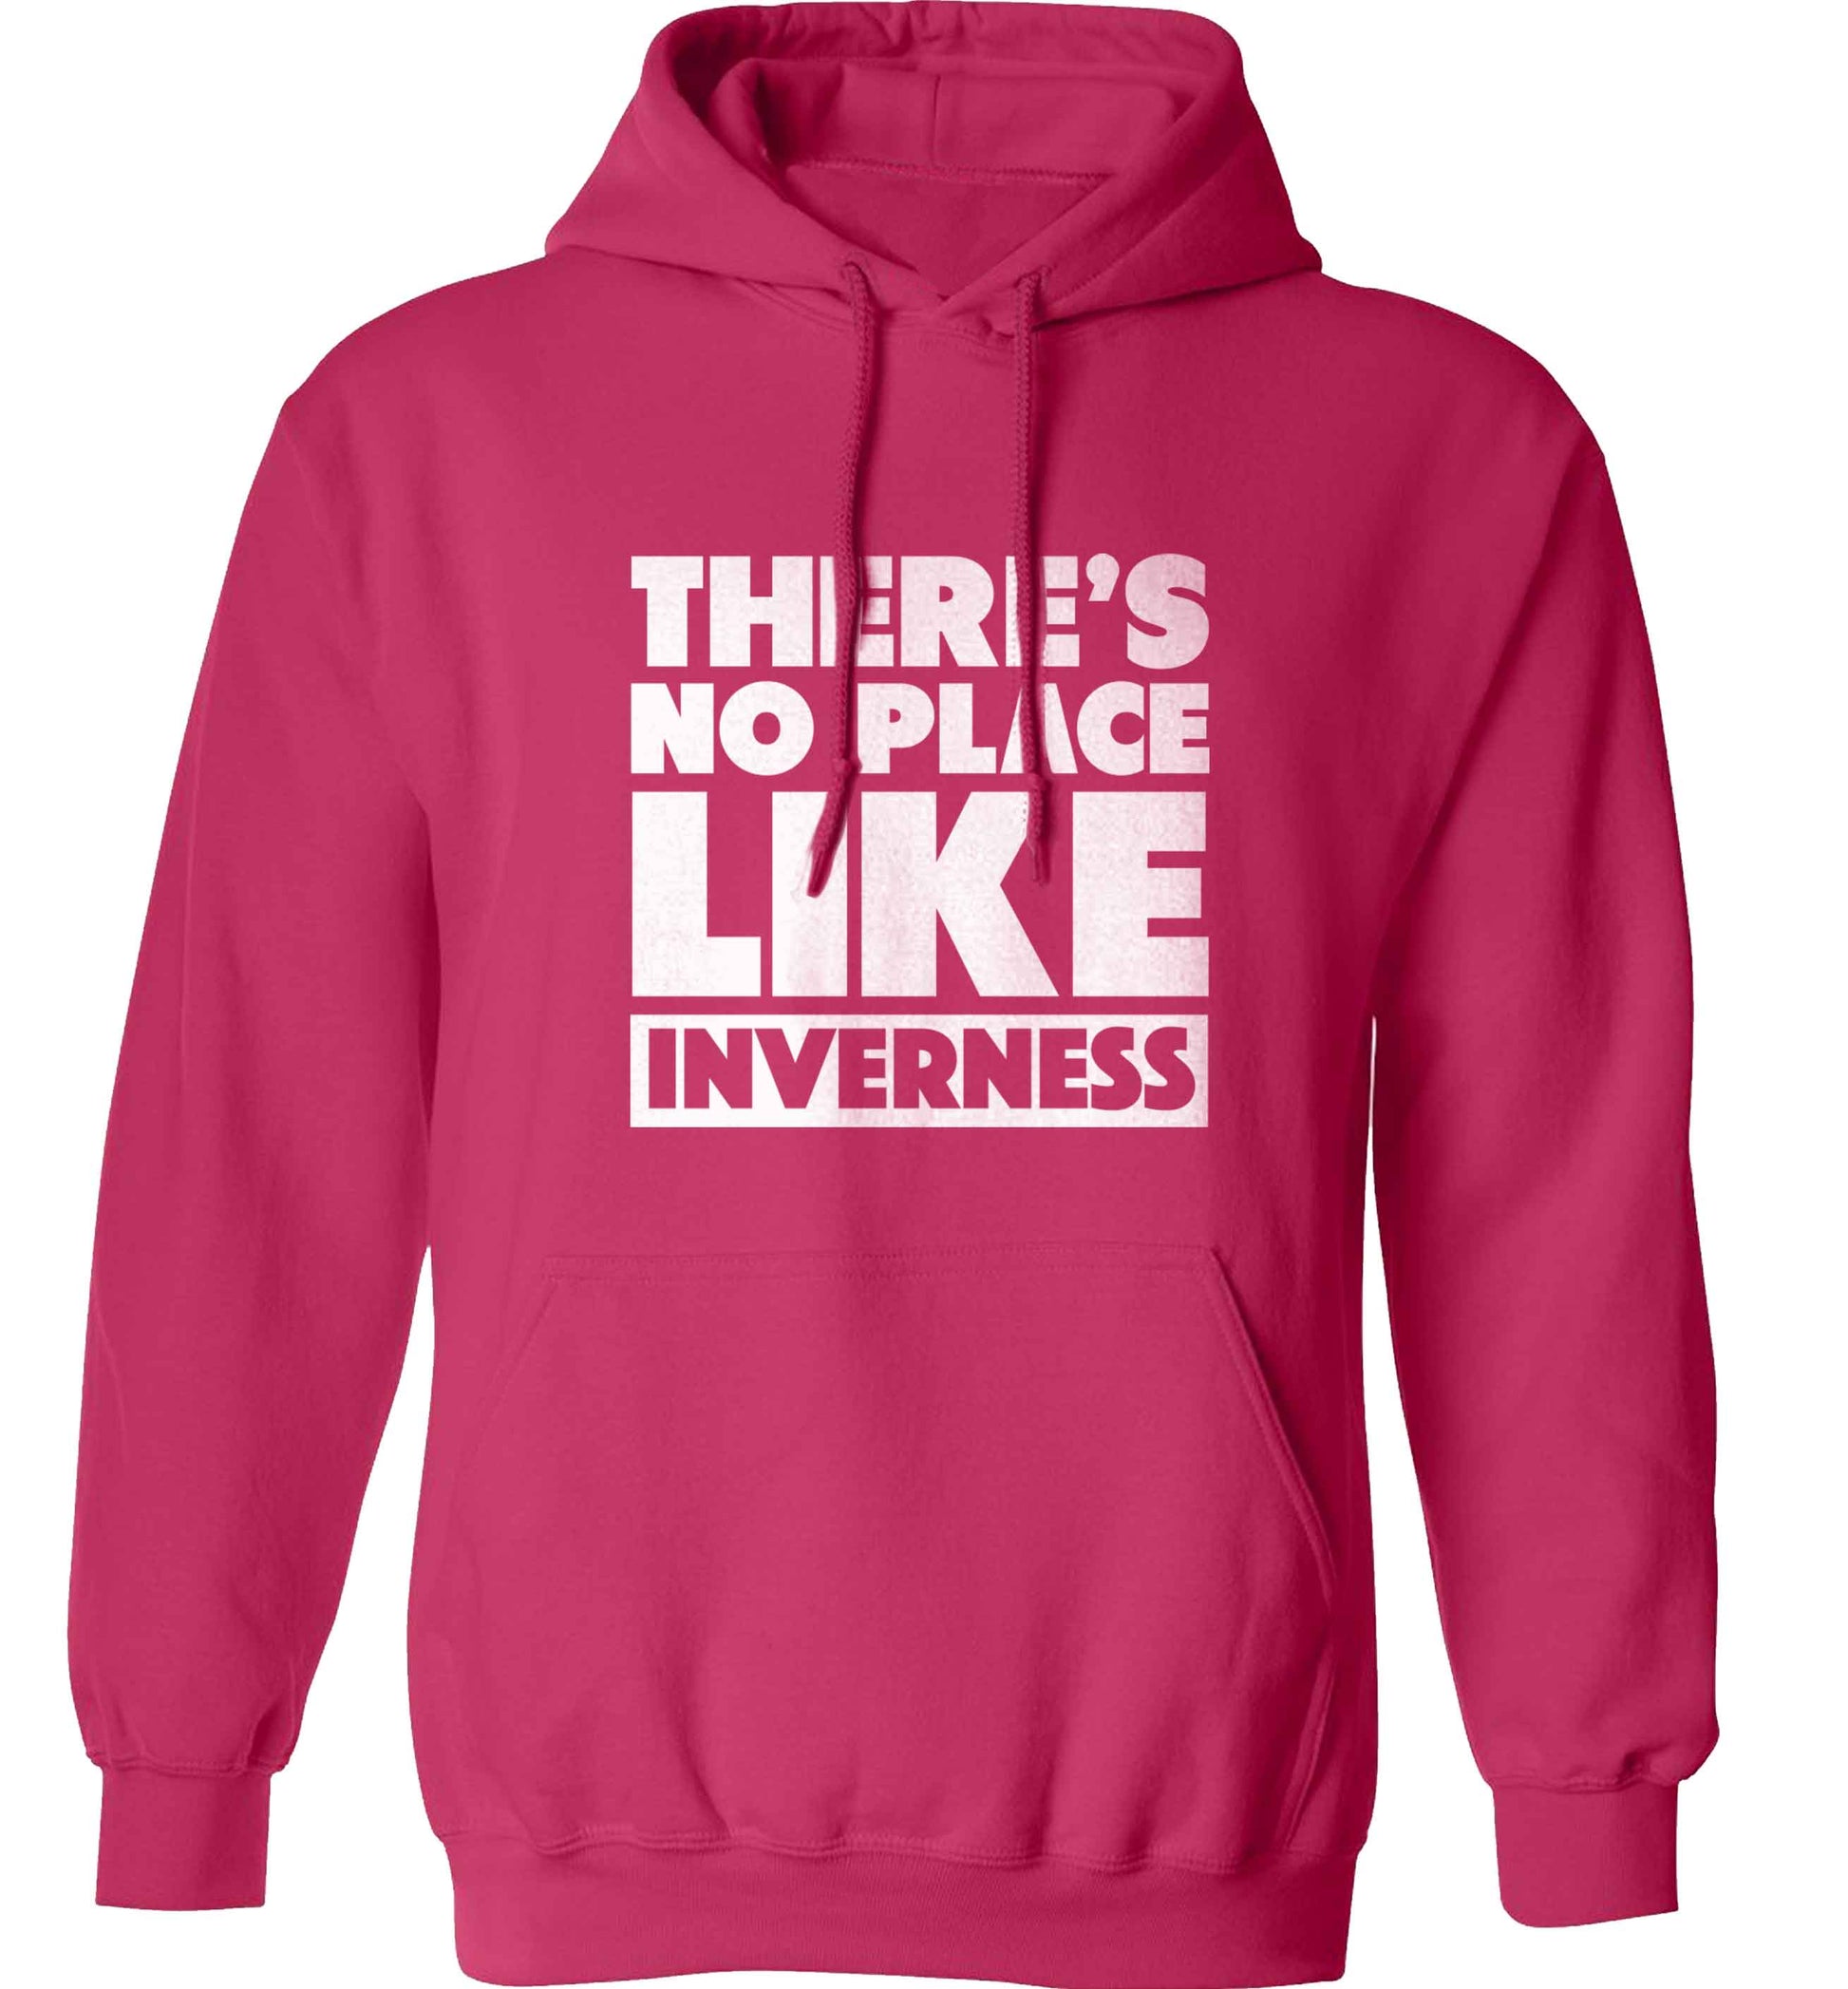 There's no place like Inverness adults unisex pink hoodie 2XL